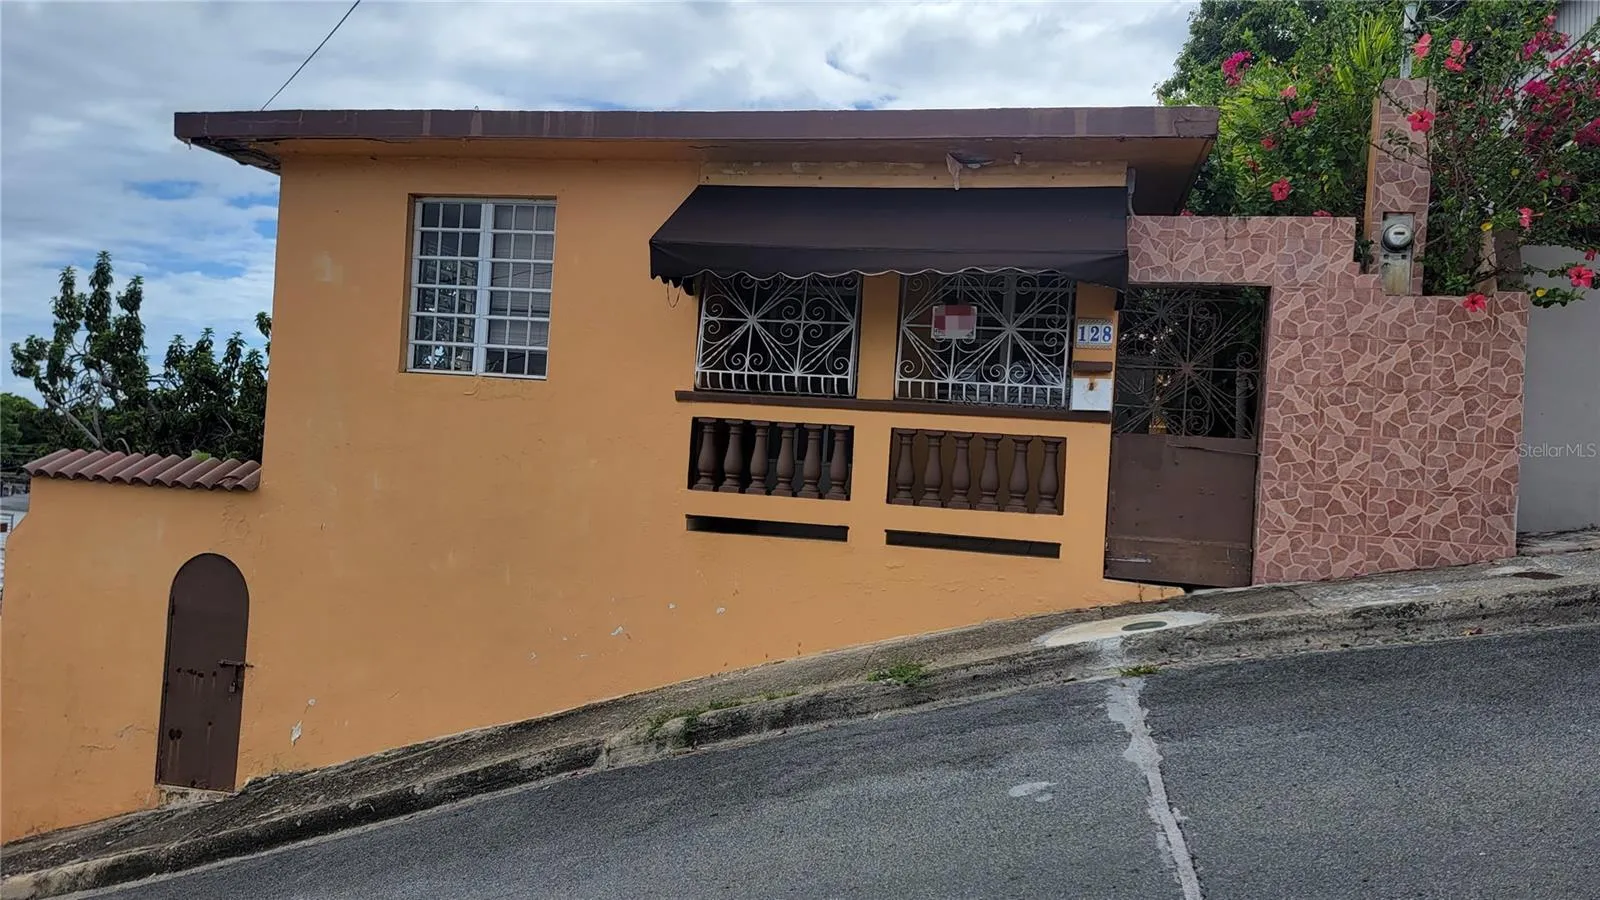 128 Calle ALFONSO PILLOT, Guayama, Puerto Rico 00784, 5 Bedrooms Bedrooms, ,1 BathroomBathrooms,Residential,For Sale,ALFONSO PILLOT,PR9105985